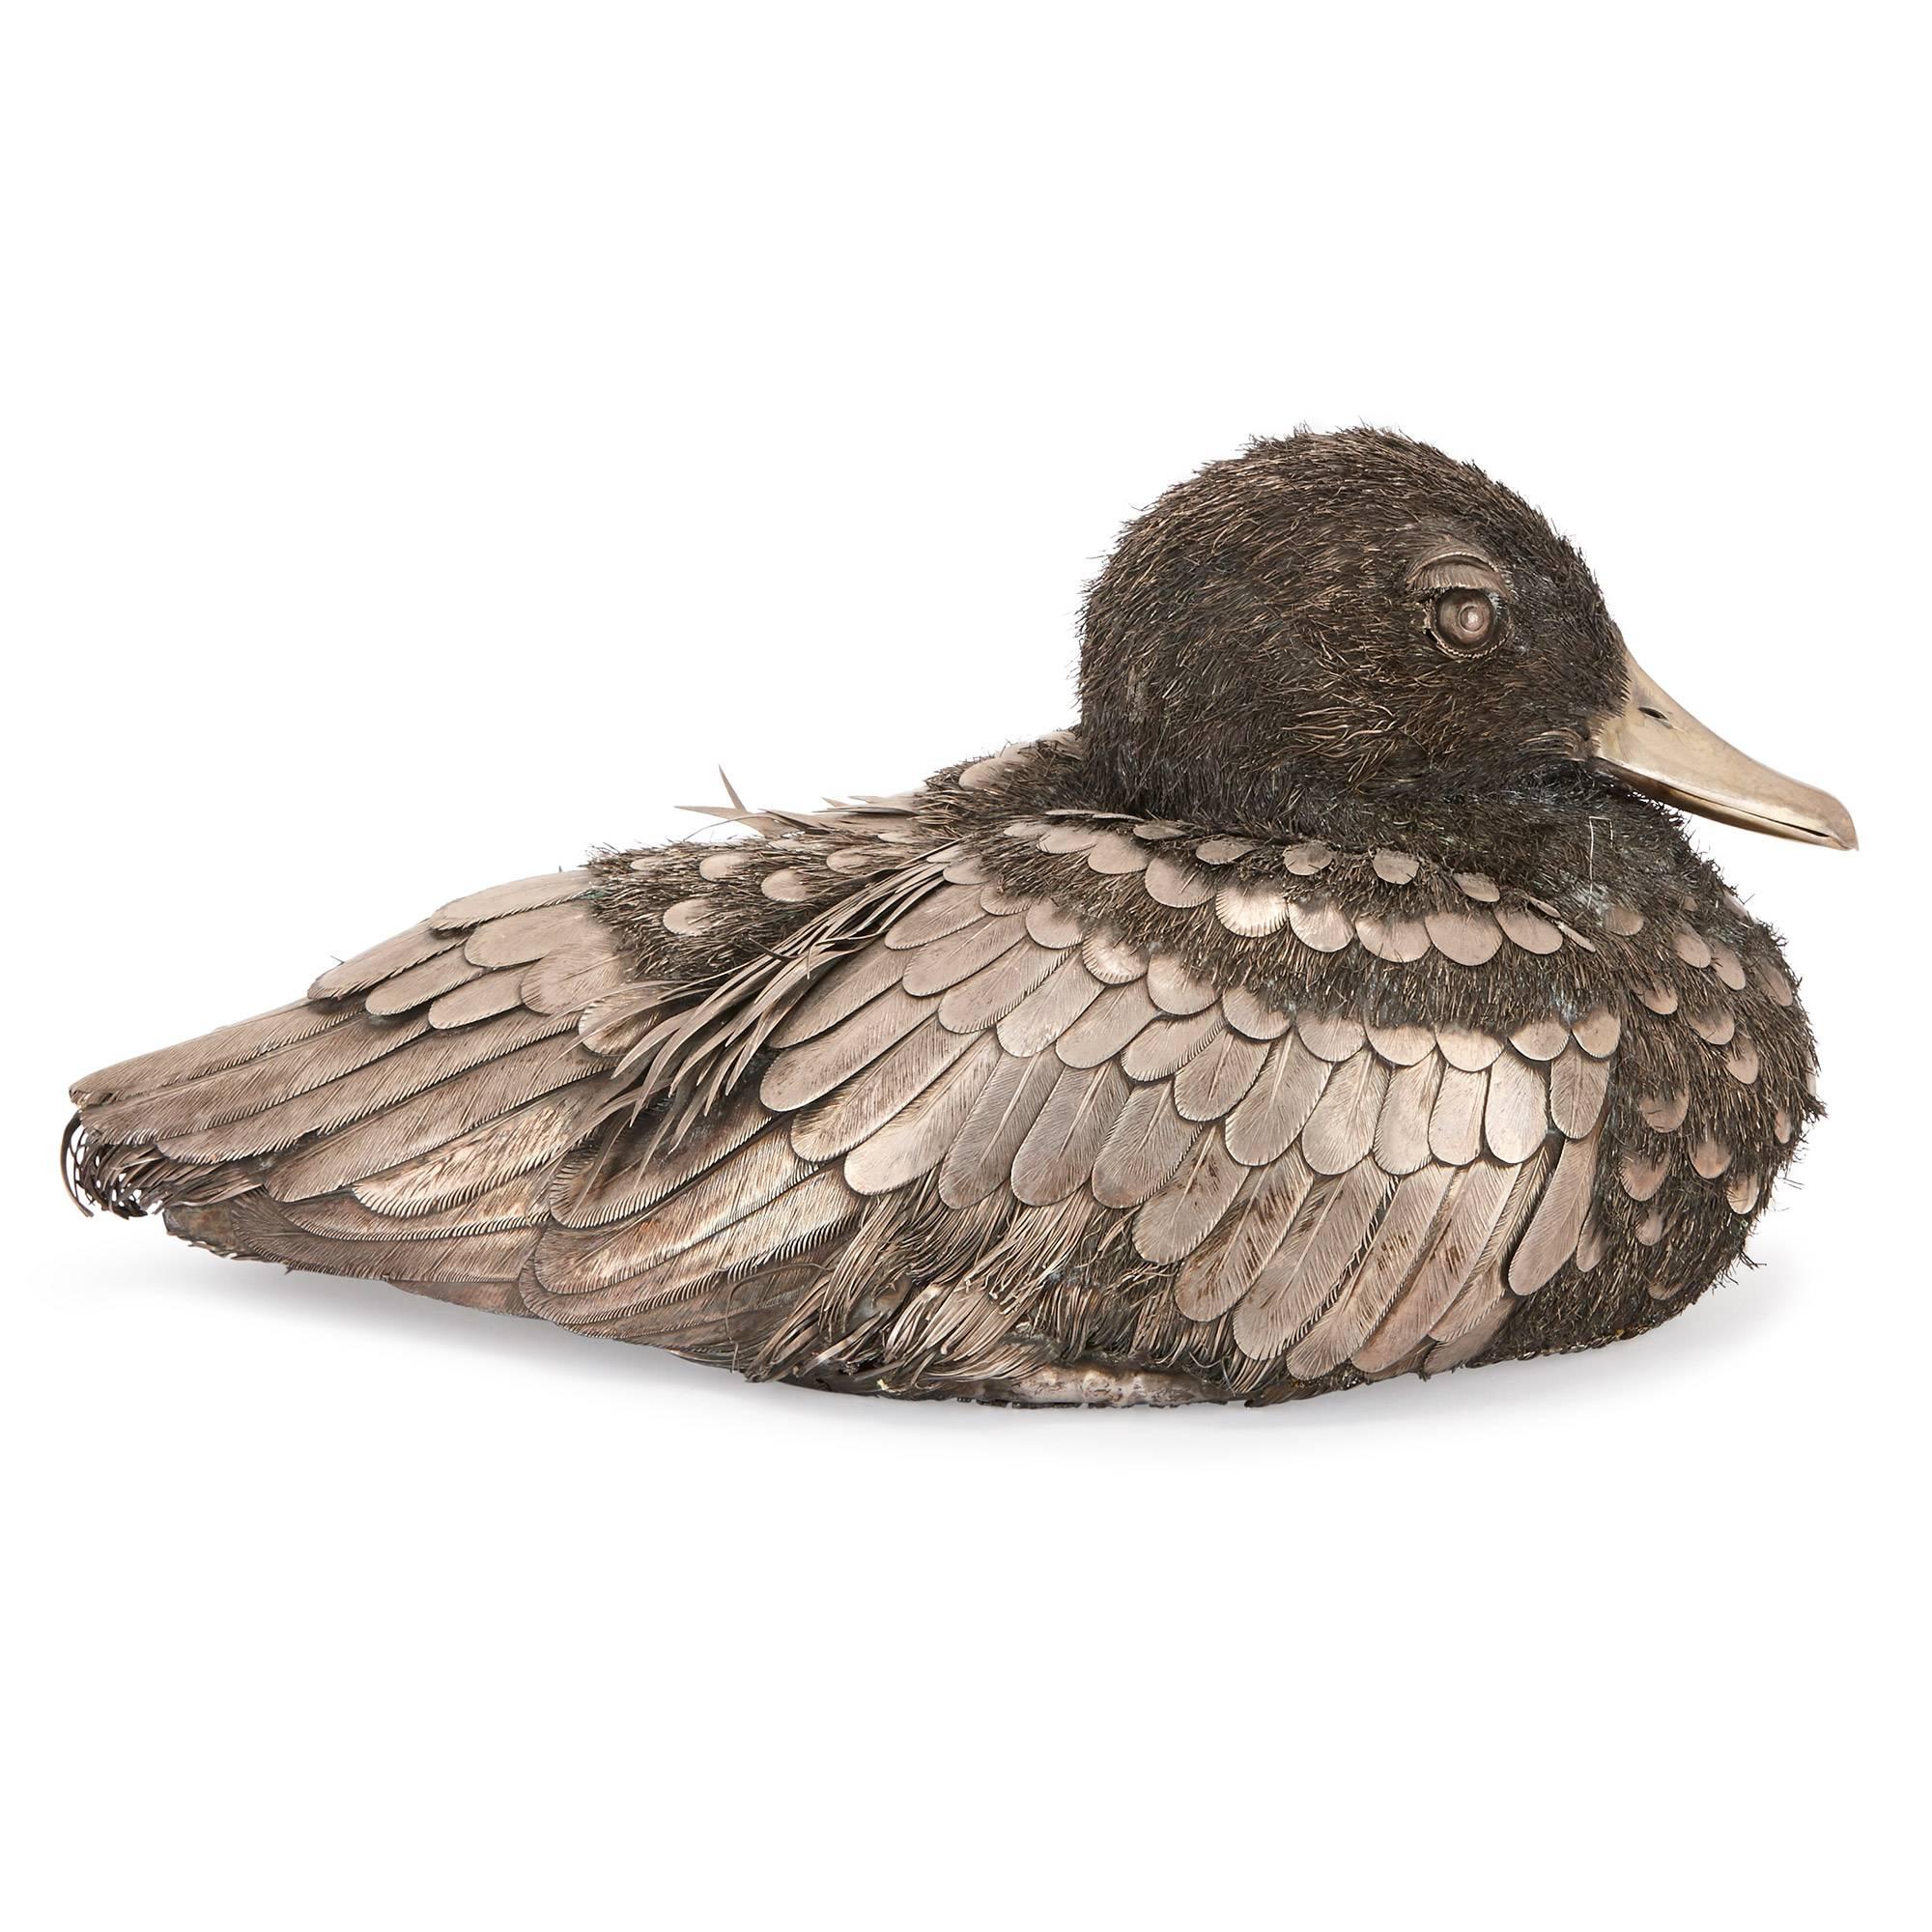 This charming silver sculptural model of a duck has been carefully crafted in the style of the celebrated jeweler Mario Buccellati (Italian, 1891-1965) and is a startlingly realistic representation.

The duck is made entirely in silver and is